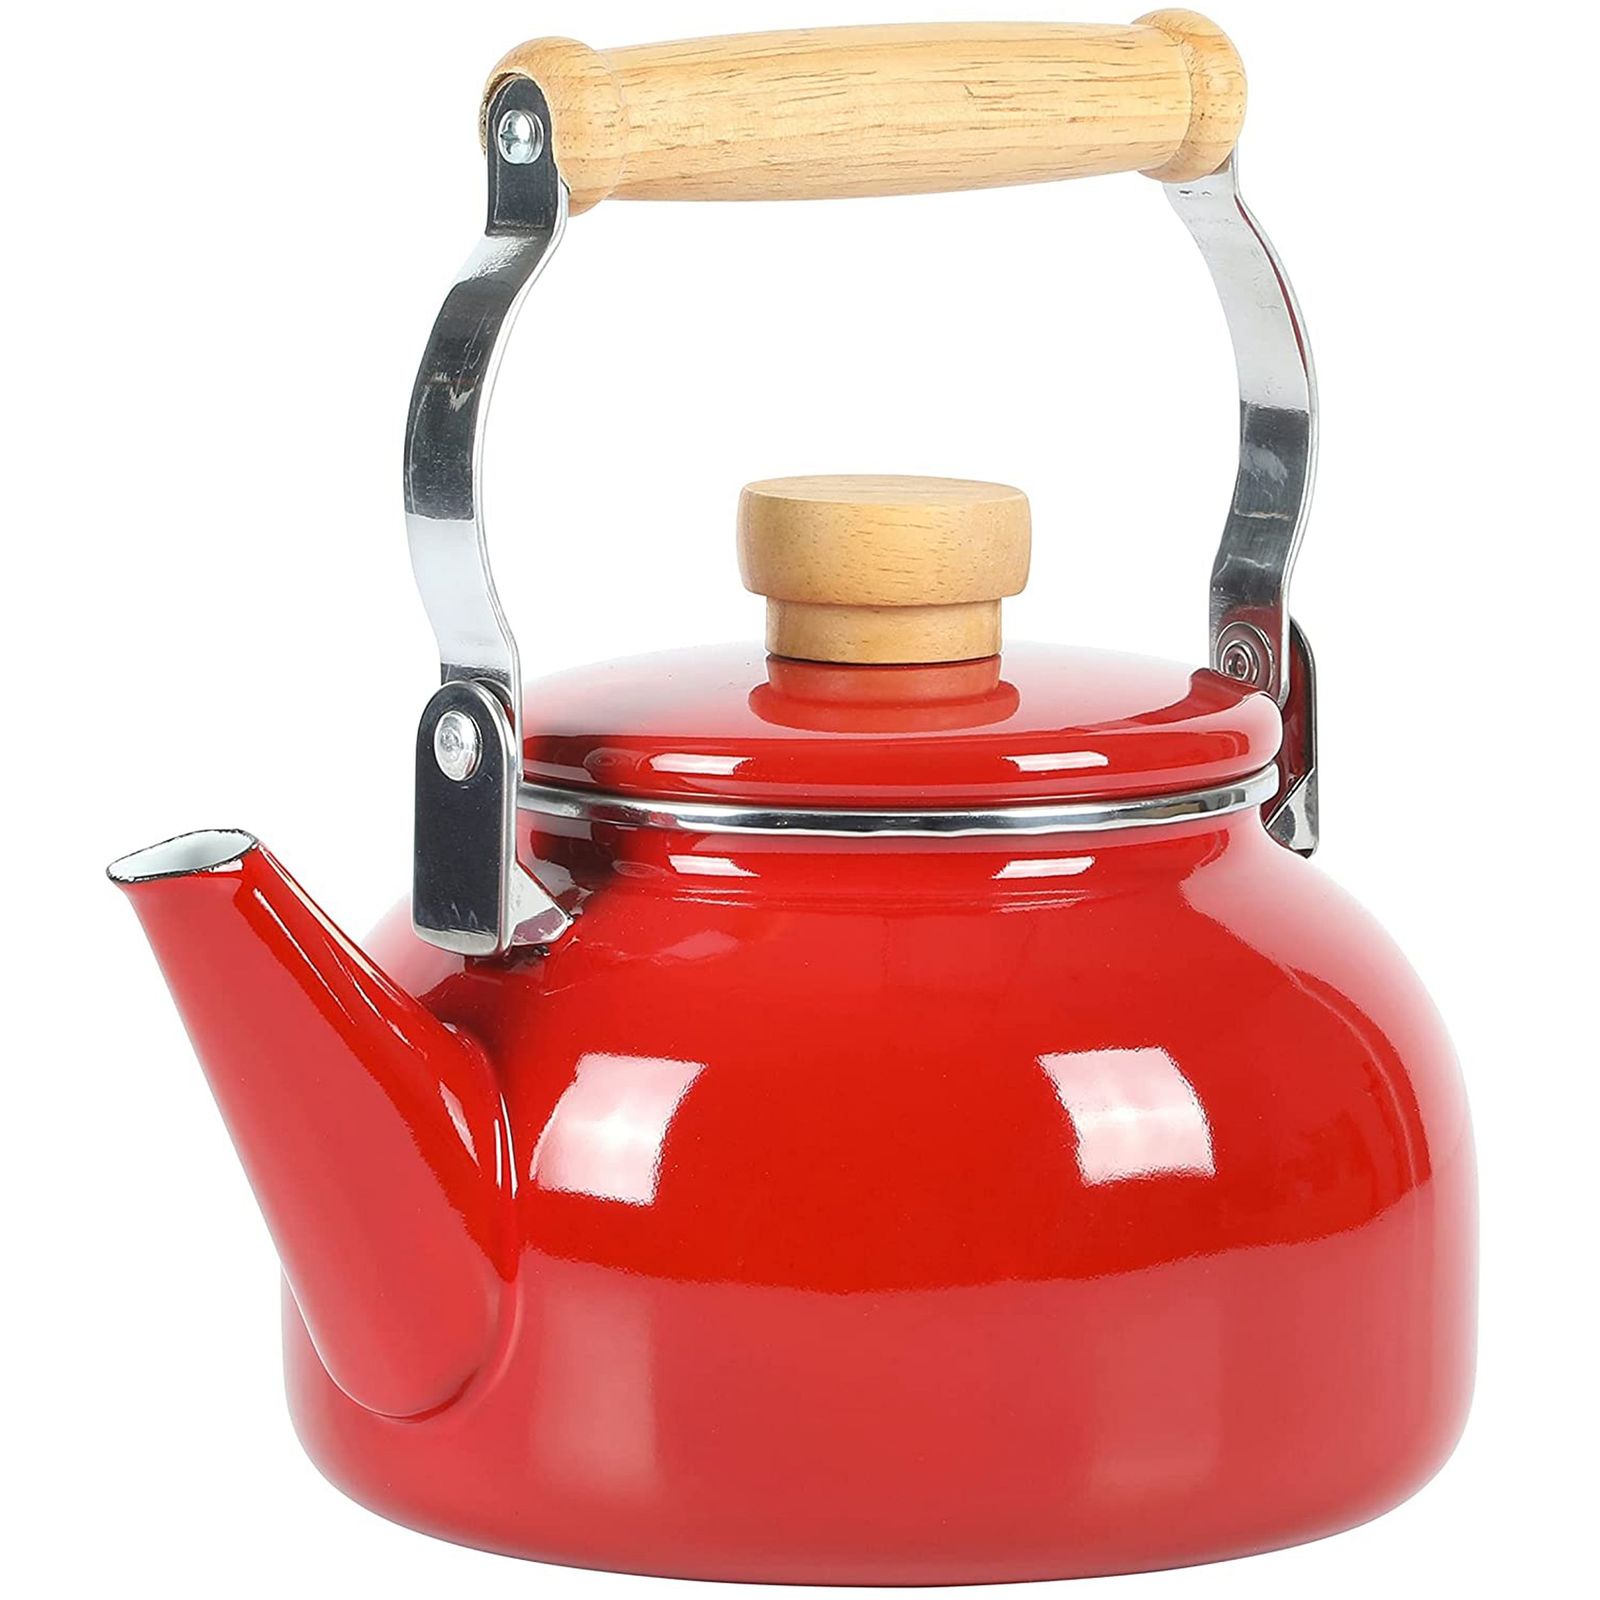 Primary image for Mr. Coffee Quentin 1.5 Quart Tea Kettle With Fold Down Handle in Red